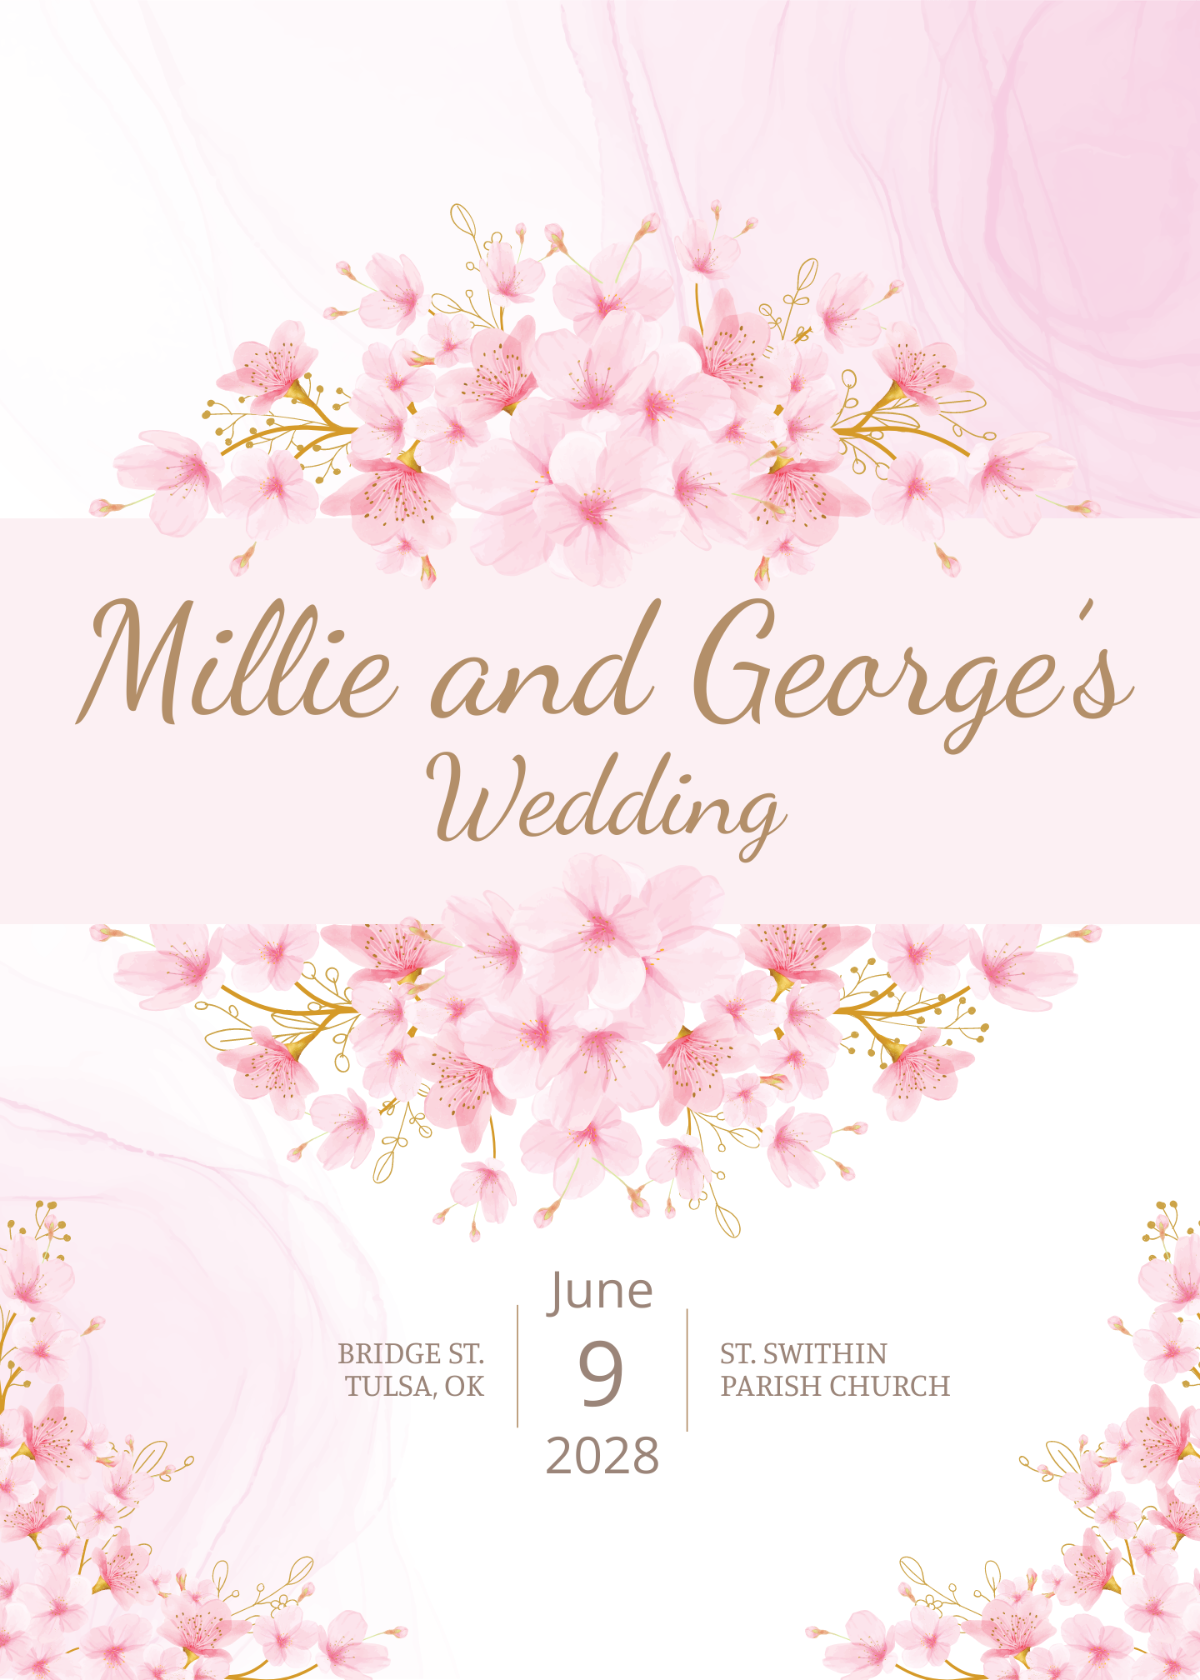 Pink Floral Wedding Invitation Card Template